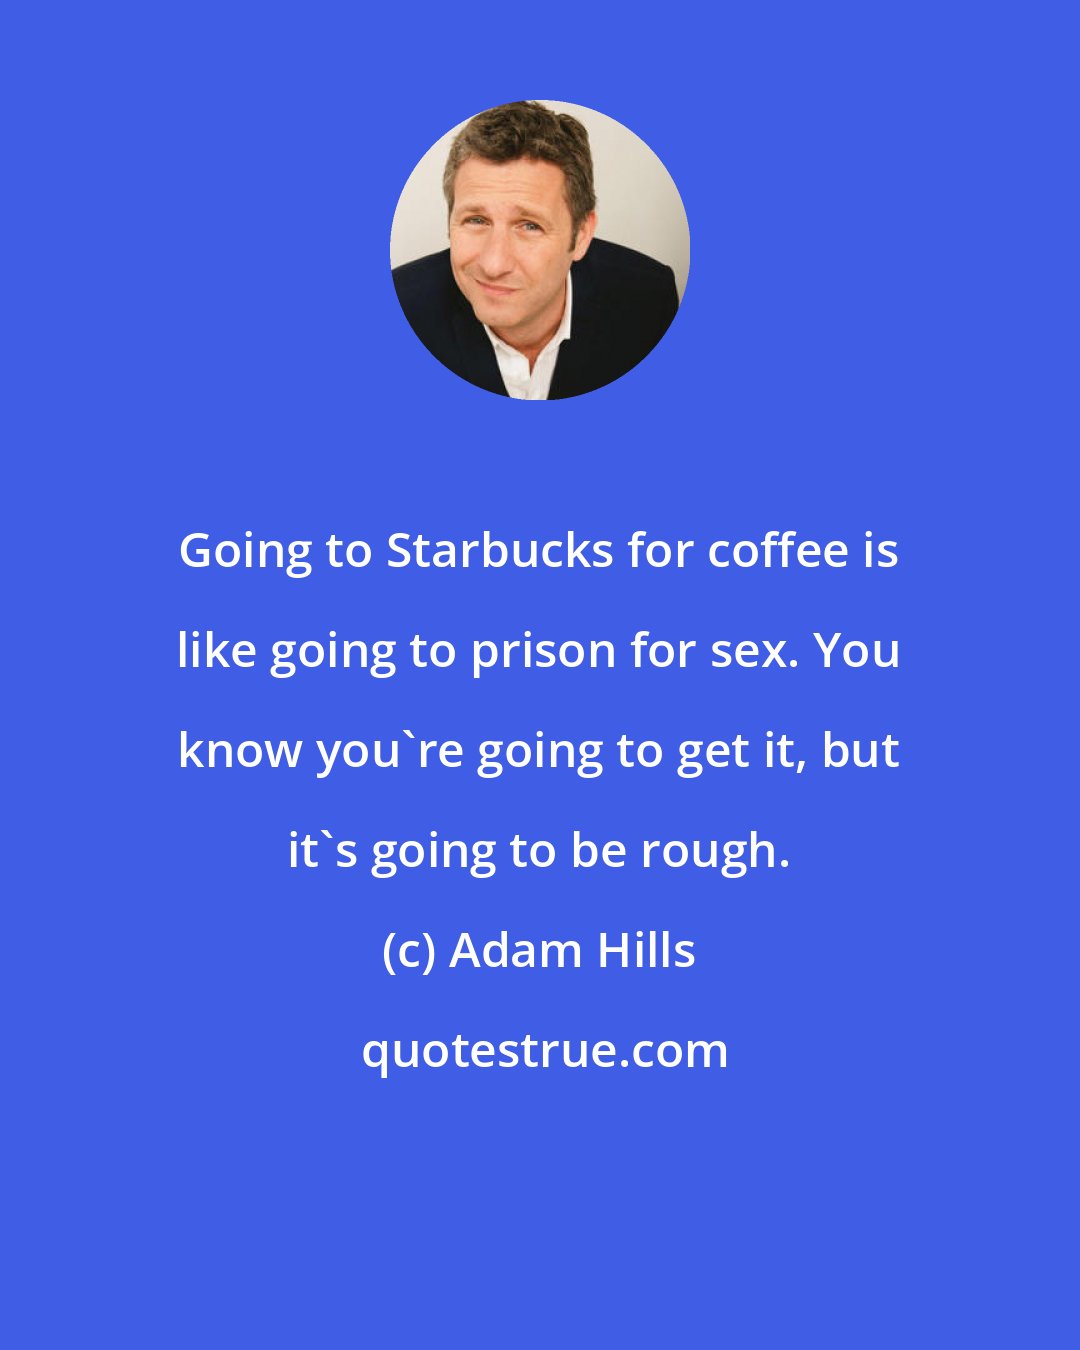 Adam Hills: Going to Starbucks for coffee is like going to prison for sex. You know you're going to get it, but it's going to be rough.